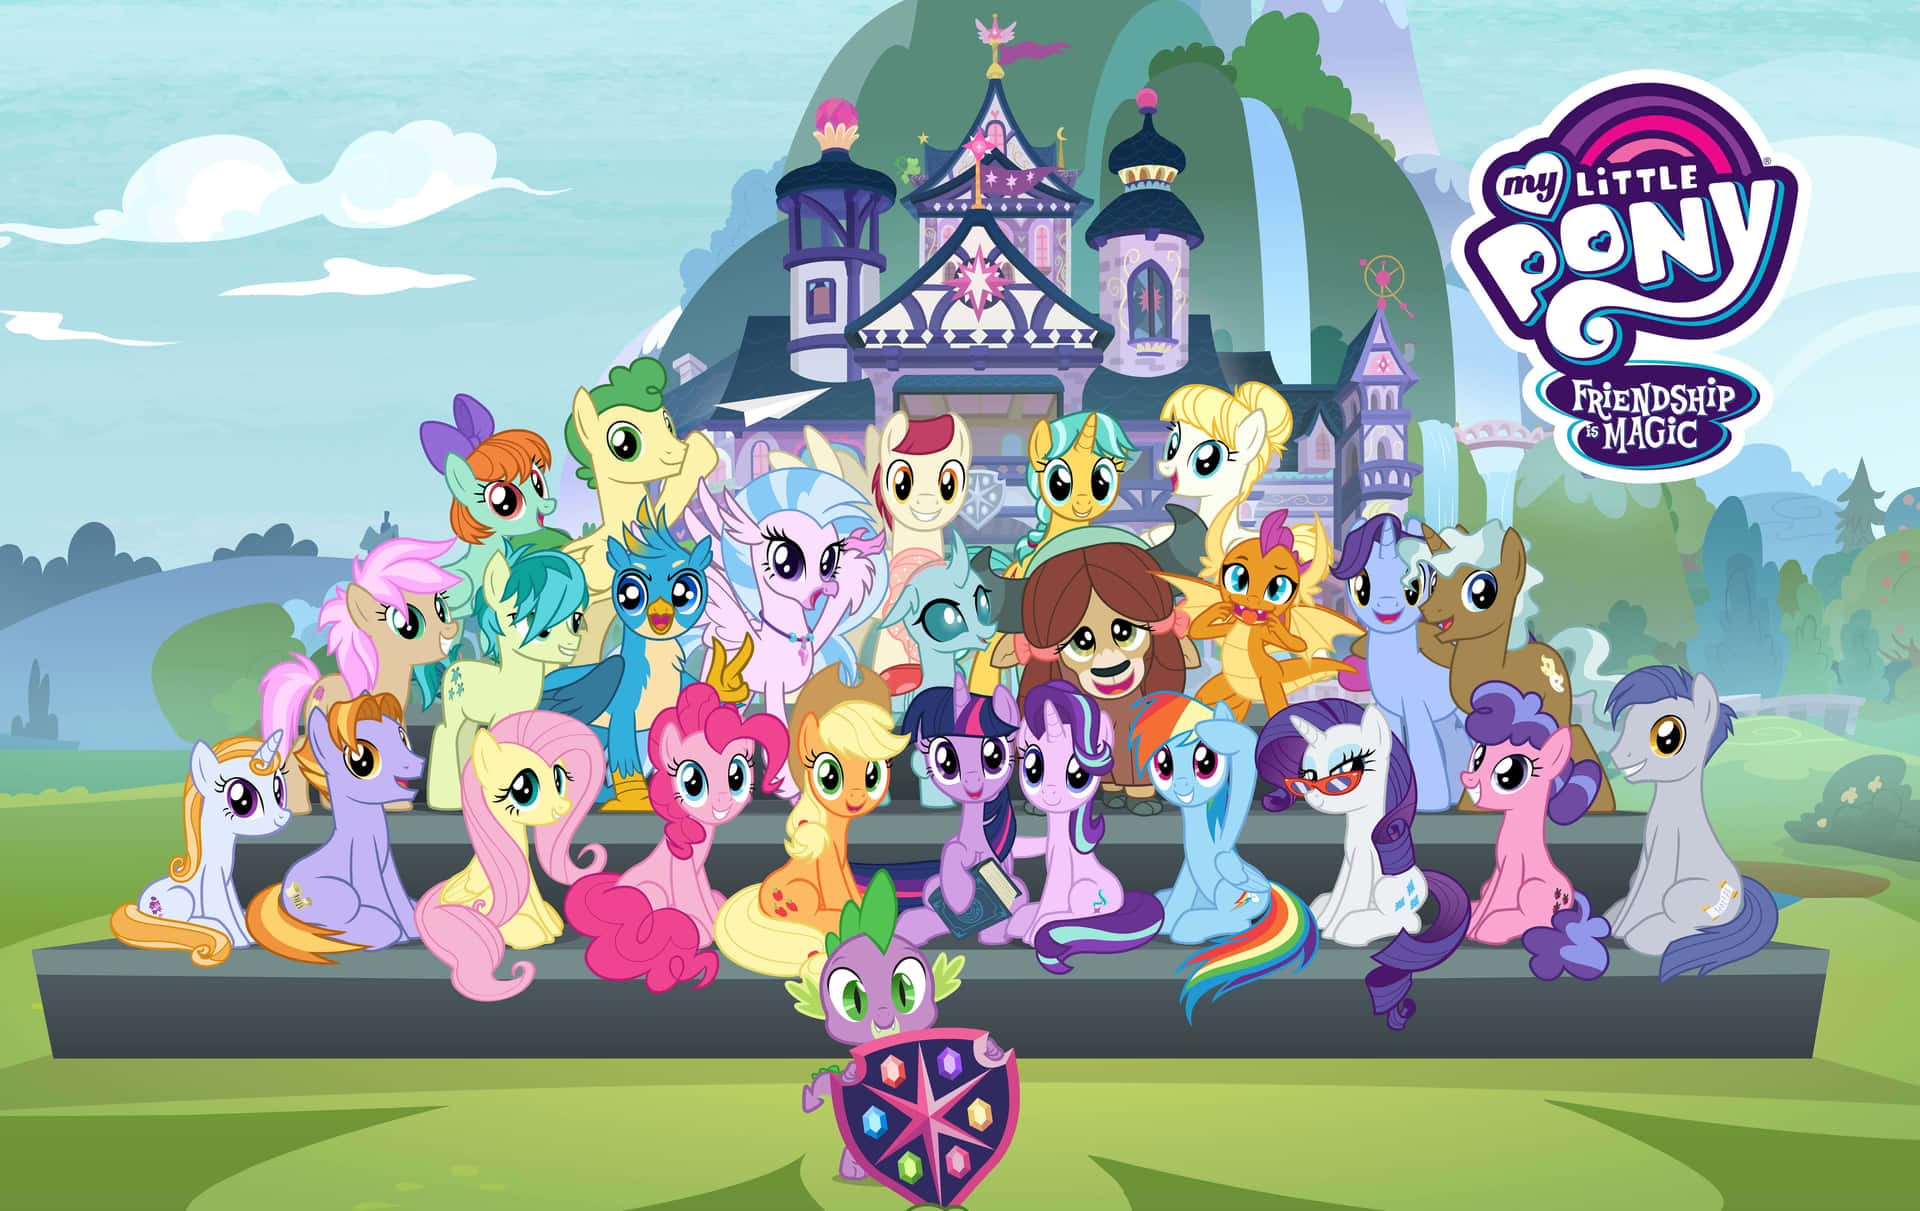 "Gather 'Round and Celebrate Friendship With My Little Pony!"